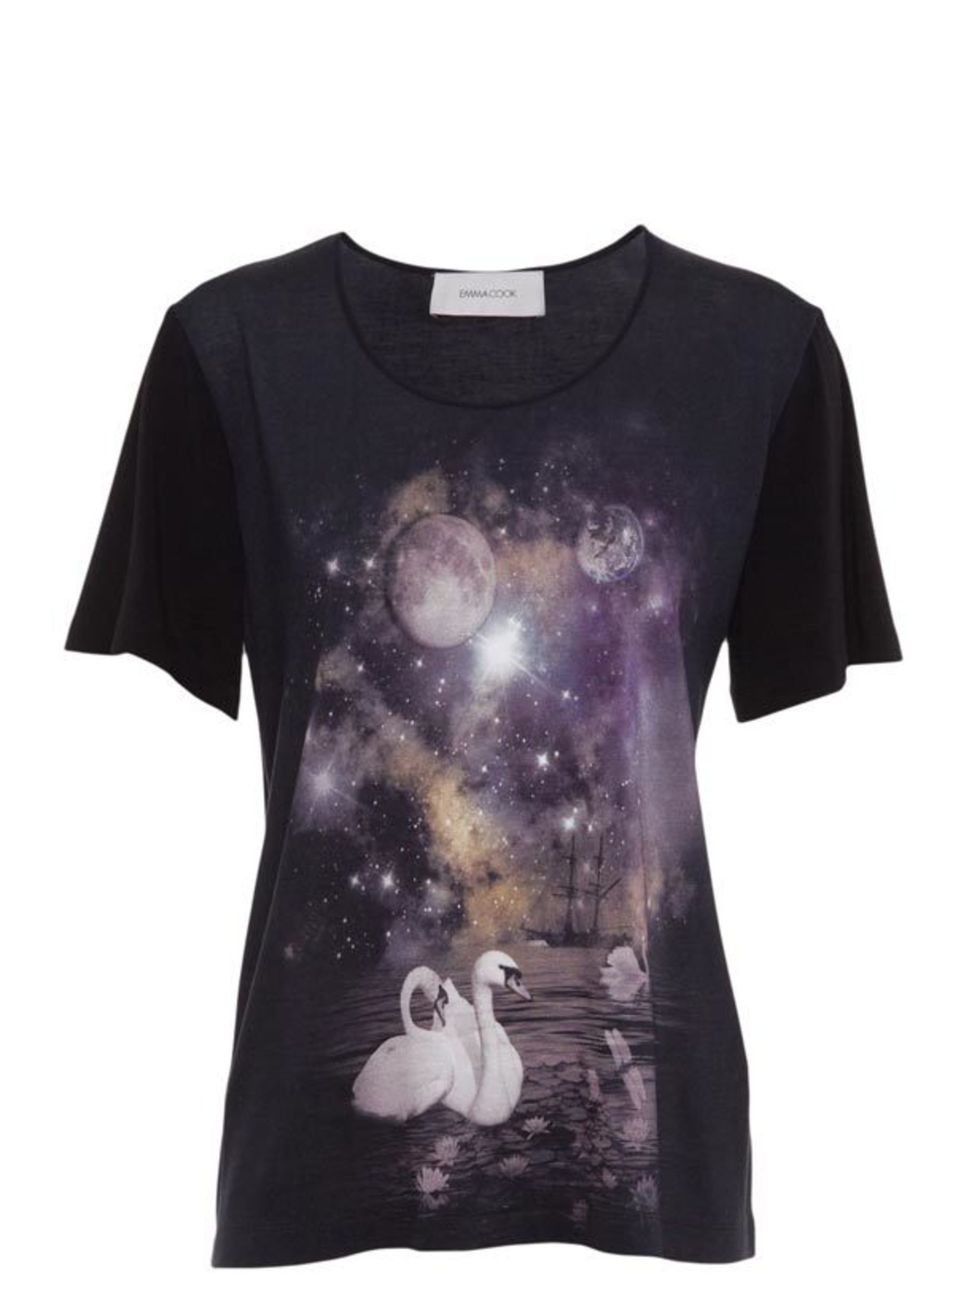 <p> </p><p>This swan printed T-shirt is far too magical for the day - dress up with statement jewels and a sequin mini for an alternative evening look. Emma Cook swan print T-shirt, £160, at <a href="http://www.harveynichols.com/womens/categories/designer